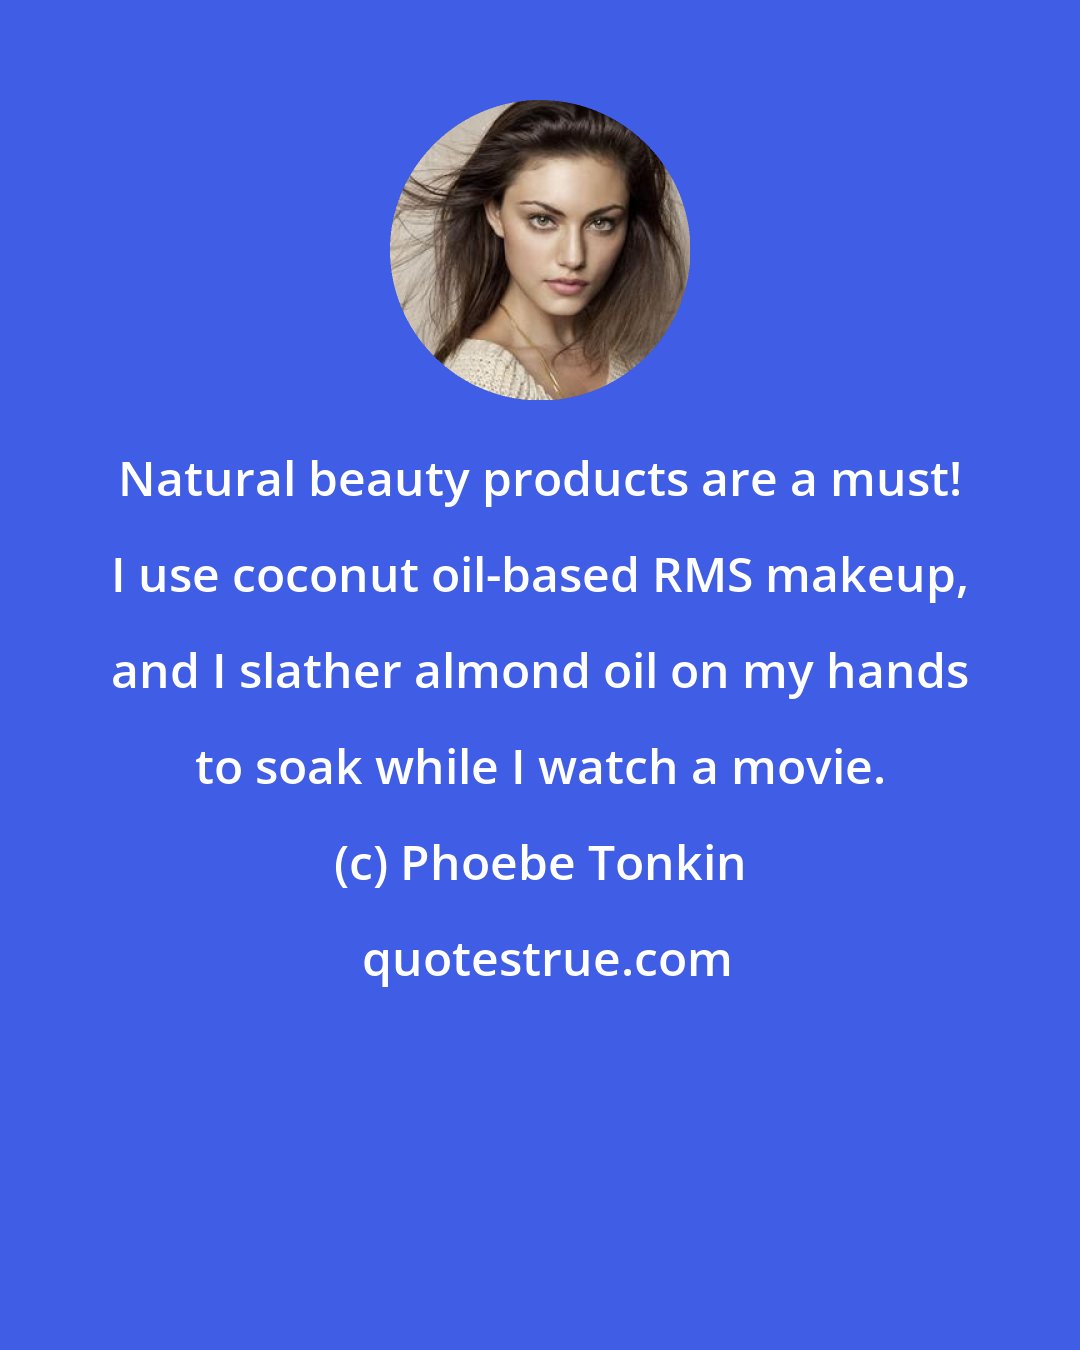 Phoebe Tonkin: Natural beauty products are a must! I use coconut oil-based RMS makeup, and I slather almond oil on my hands to soak while I watch a movie.